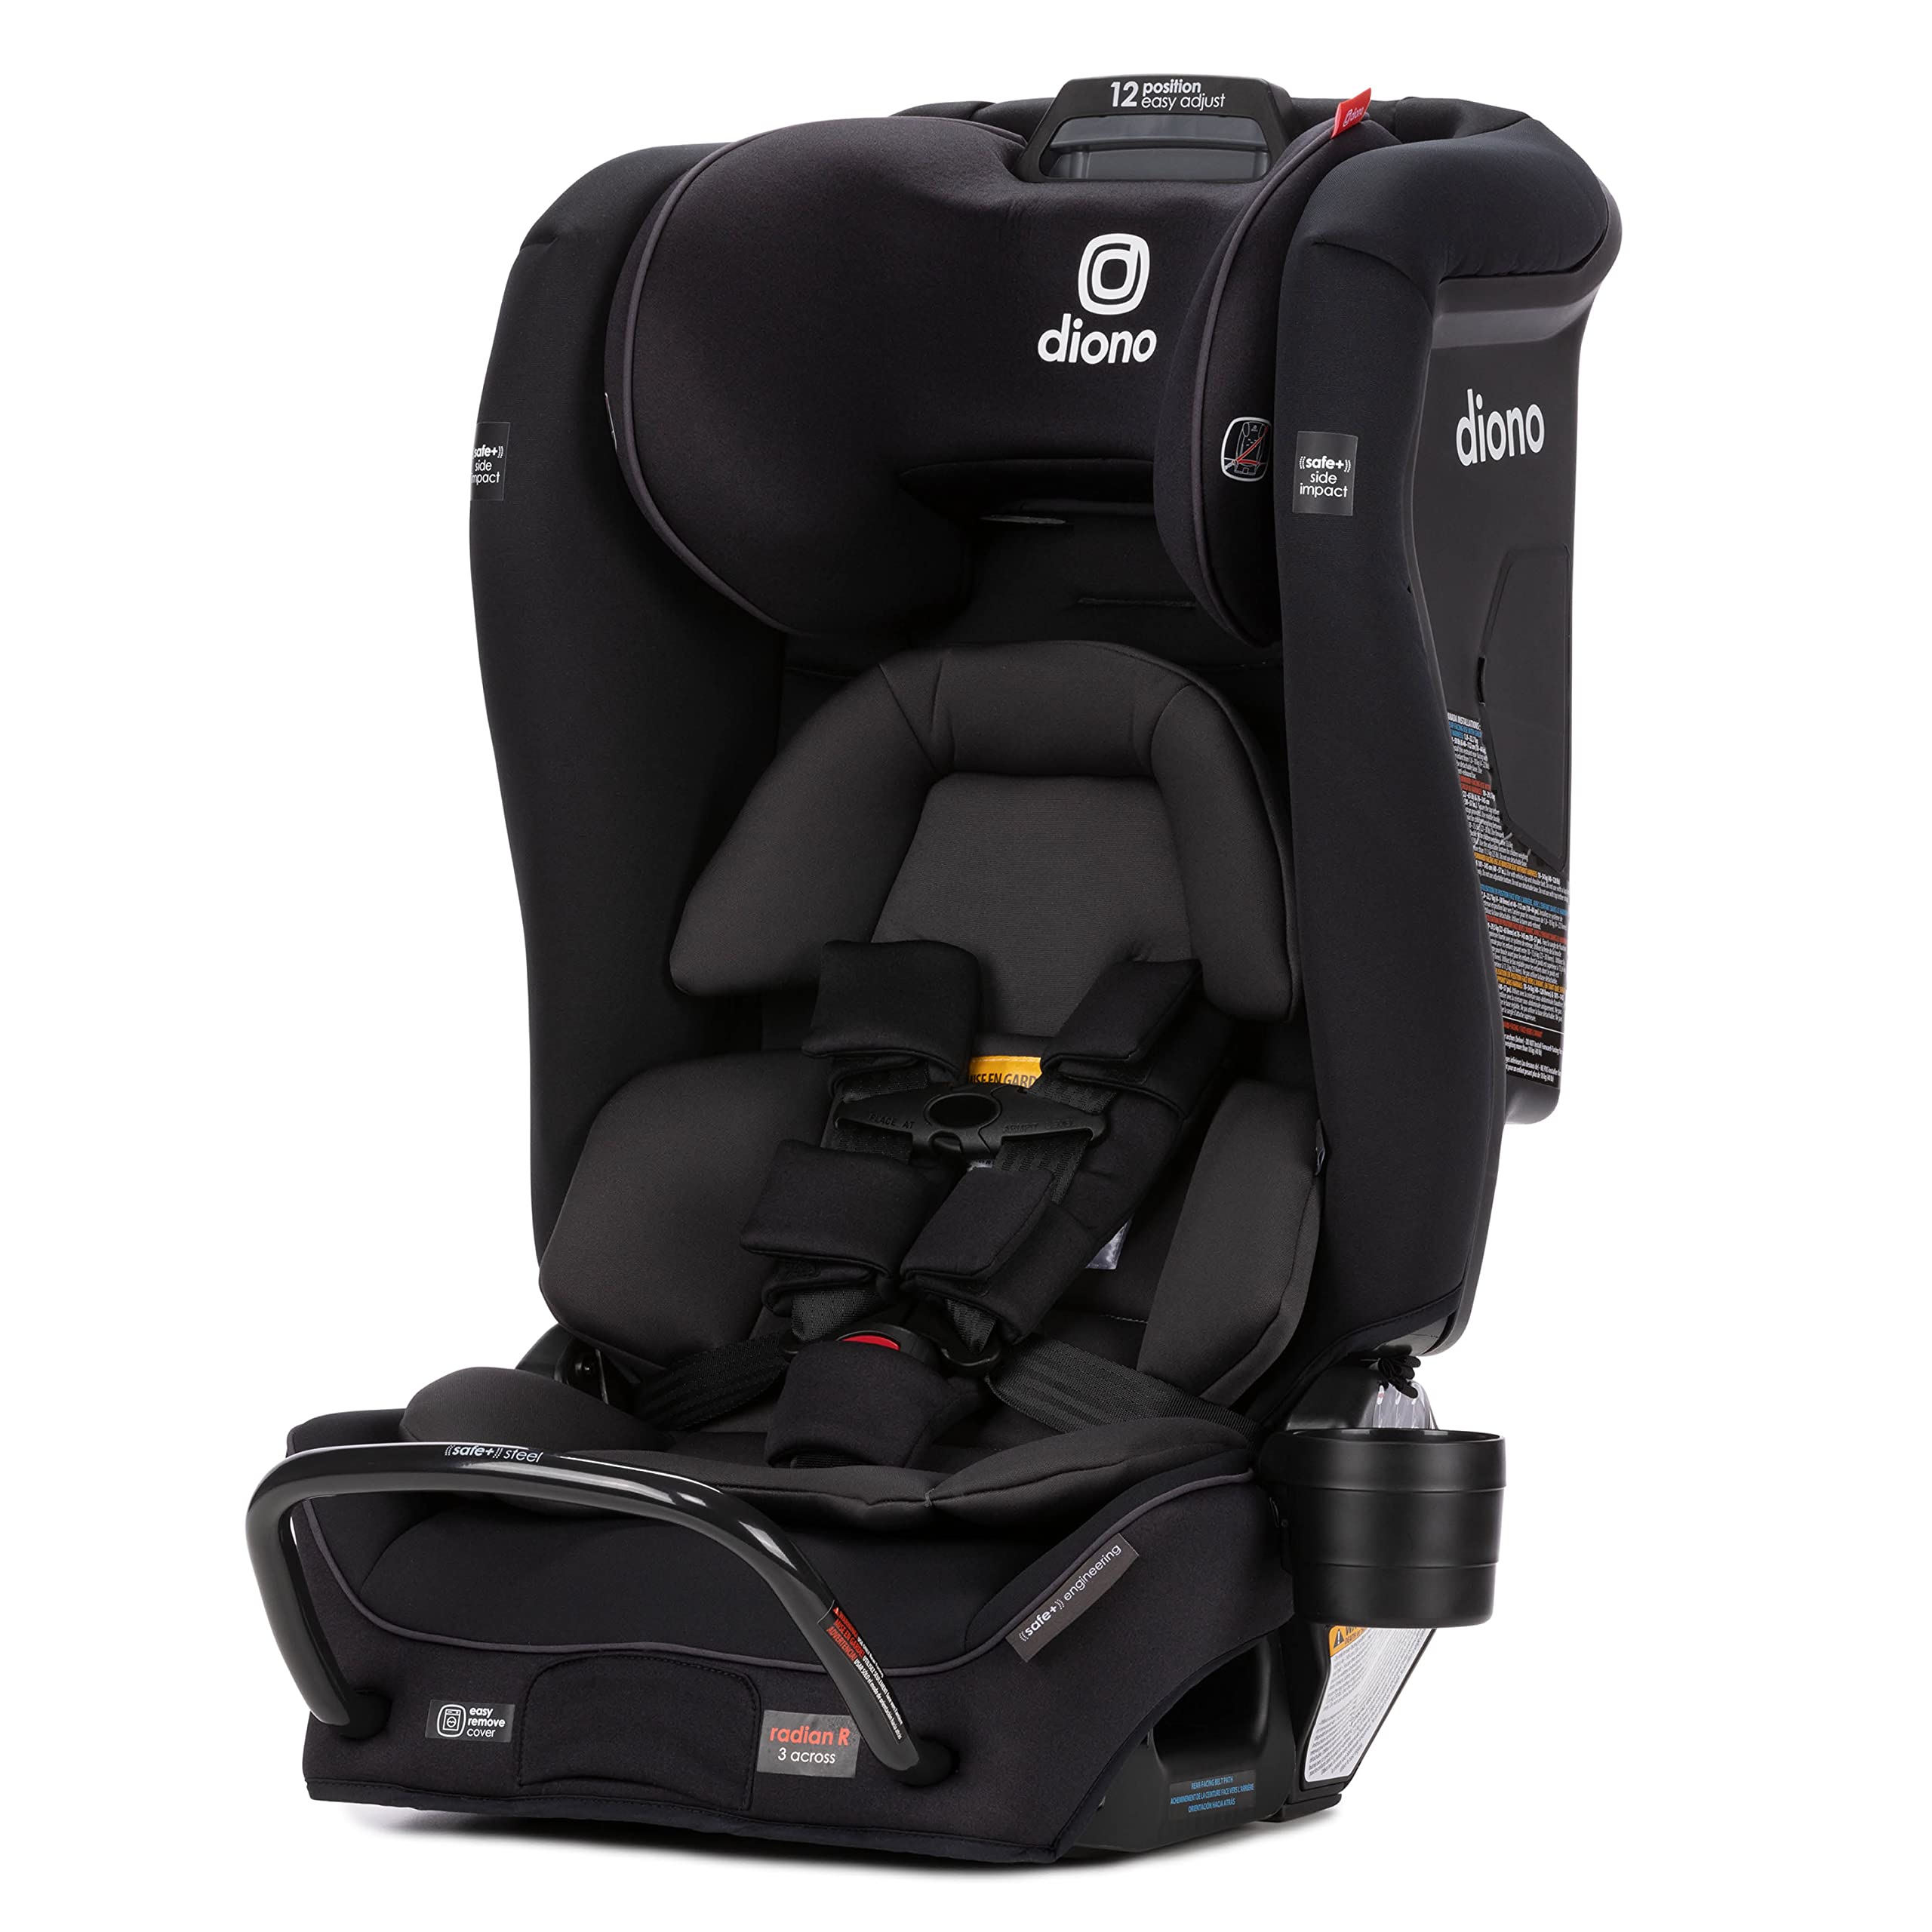 Diono Radian 3RXT Safe+, 4-in-1 convertible car Seat, Rear and Forward Facing, Safe Plus Engineering, 3 Stage Infant Pro